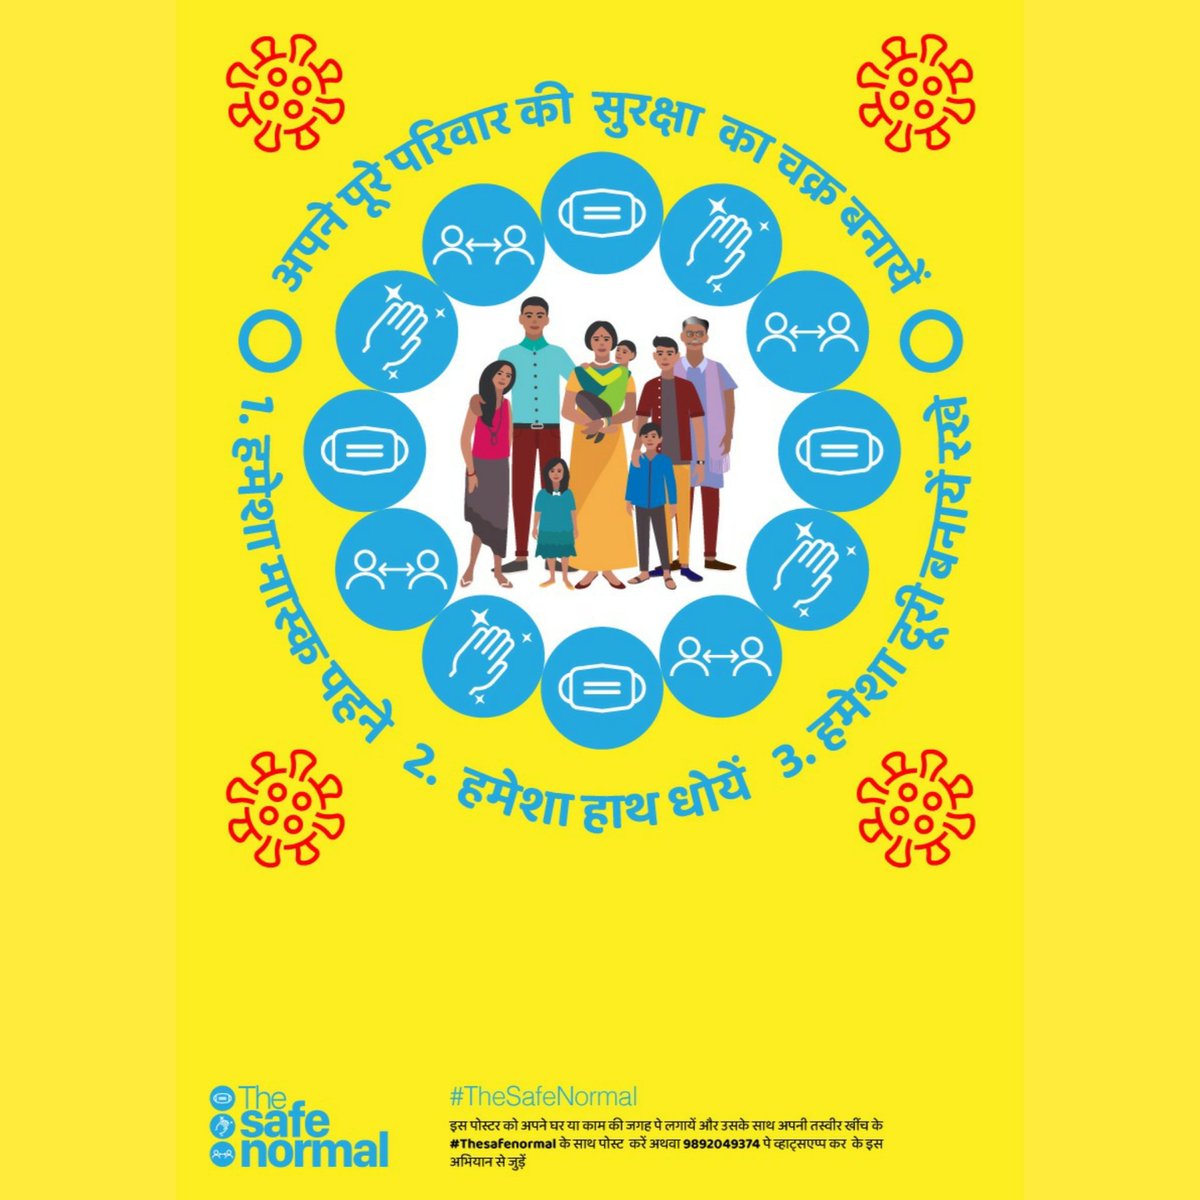 Join us doctors, nurses & medical workers to ease the burden on our healthcare system. 
Please share our mission with your family & friends to #KeepIndiaHealthy. 

And tag us at #TheSafeNormal in your Selfie & signed pledge on the sticker & poster.

@drjagannath @kirancoelho